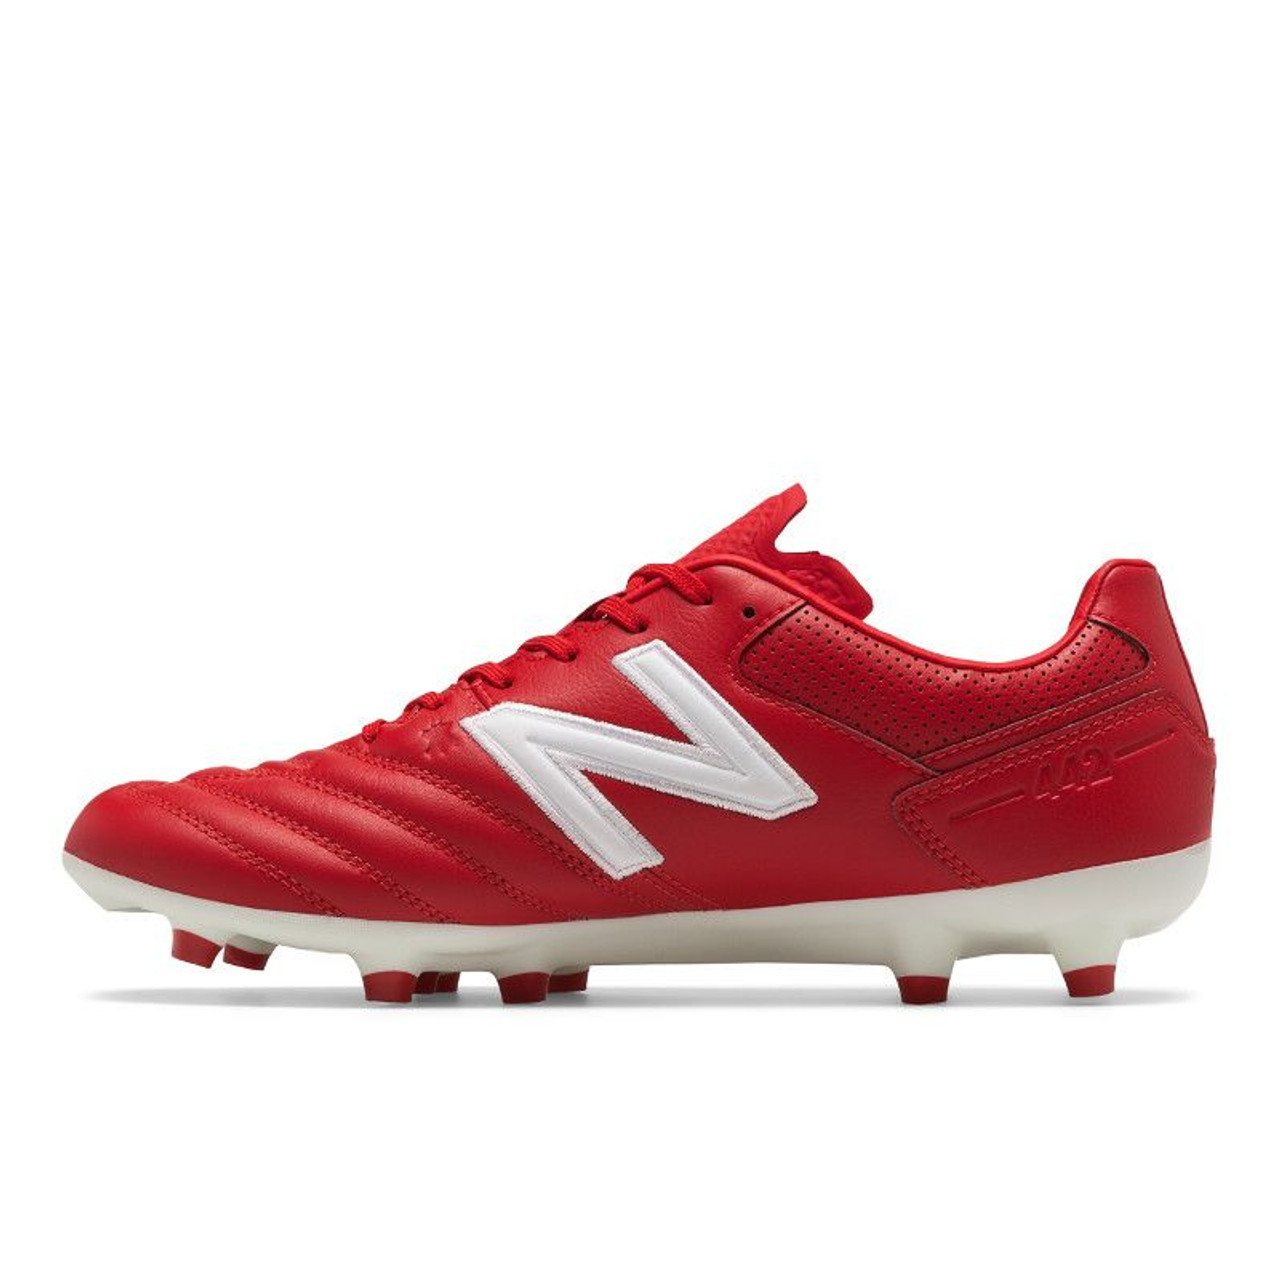 Red new balance cleats